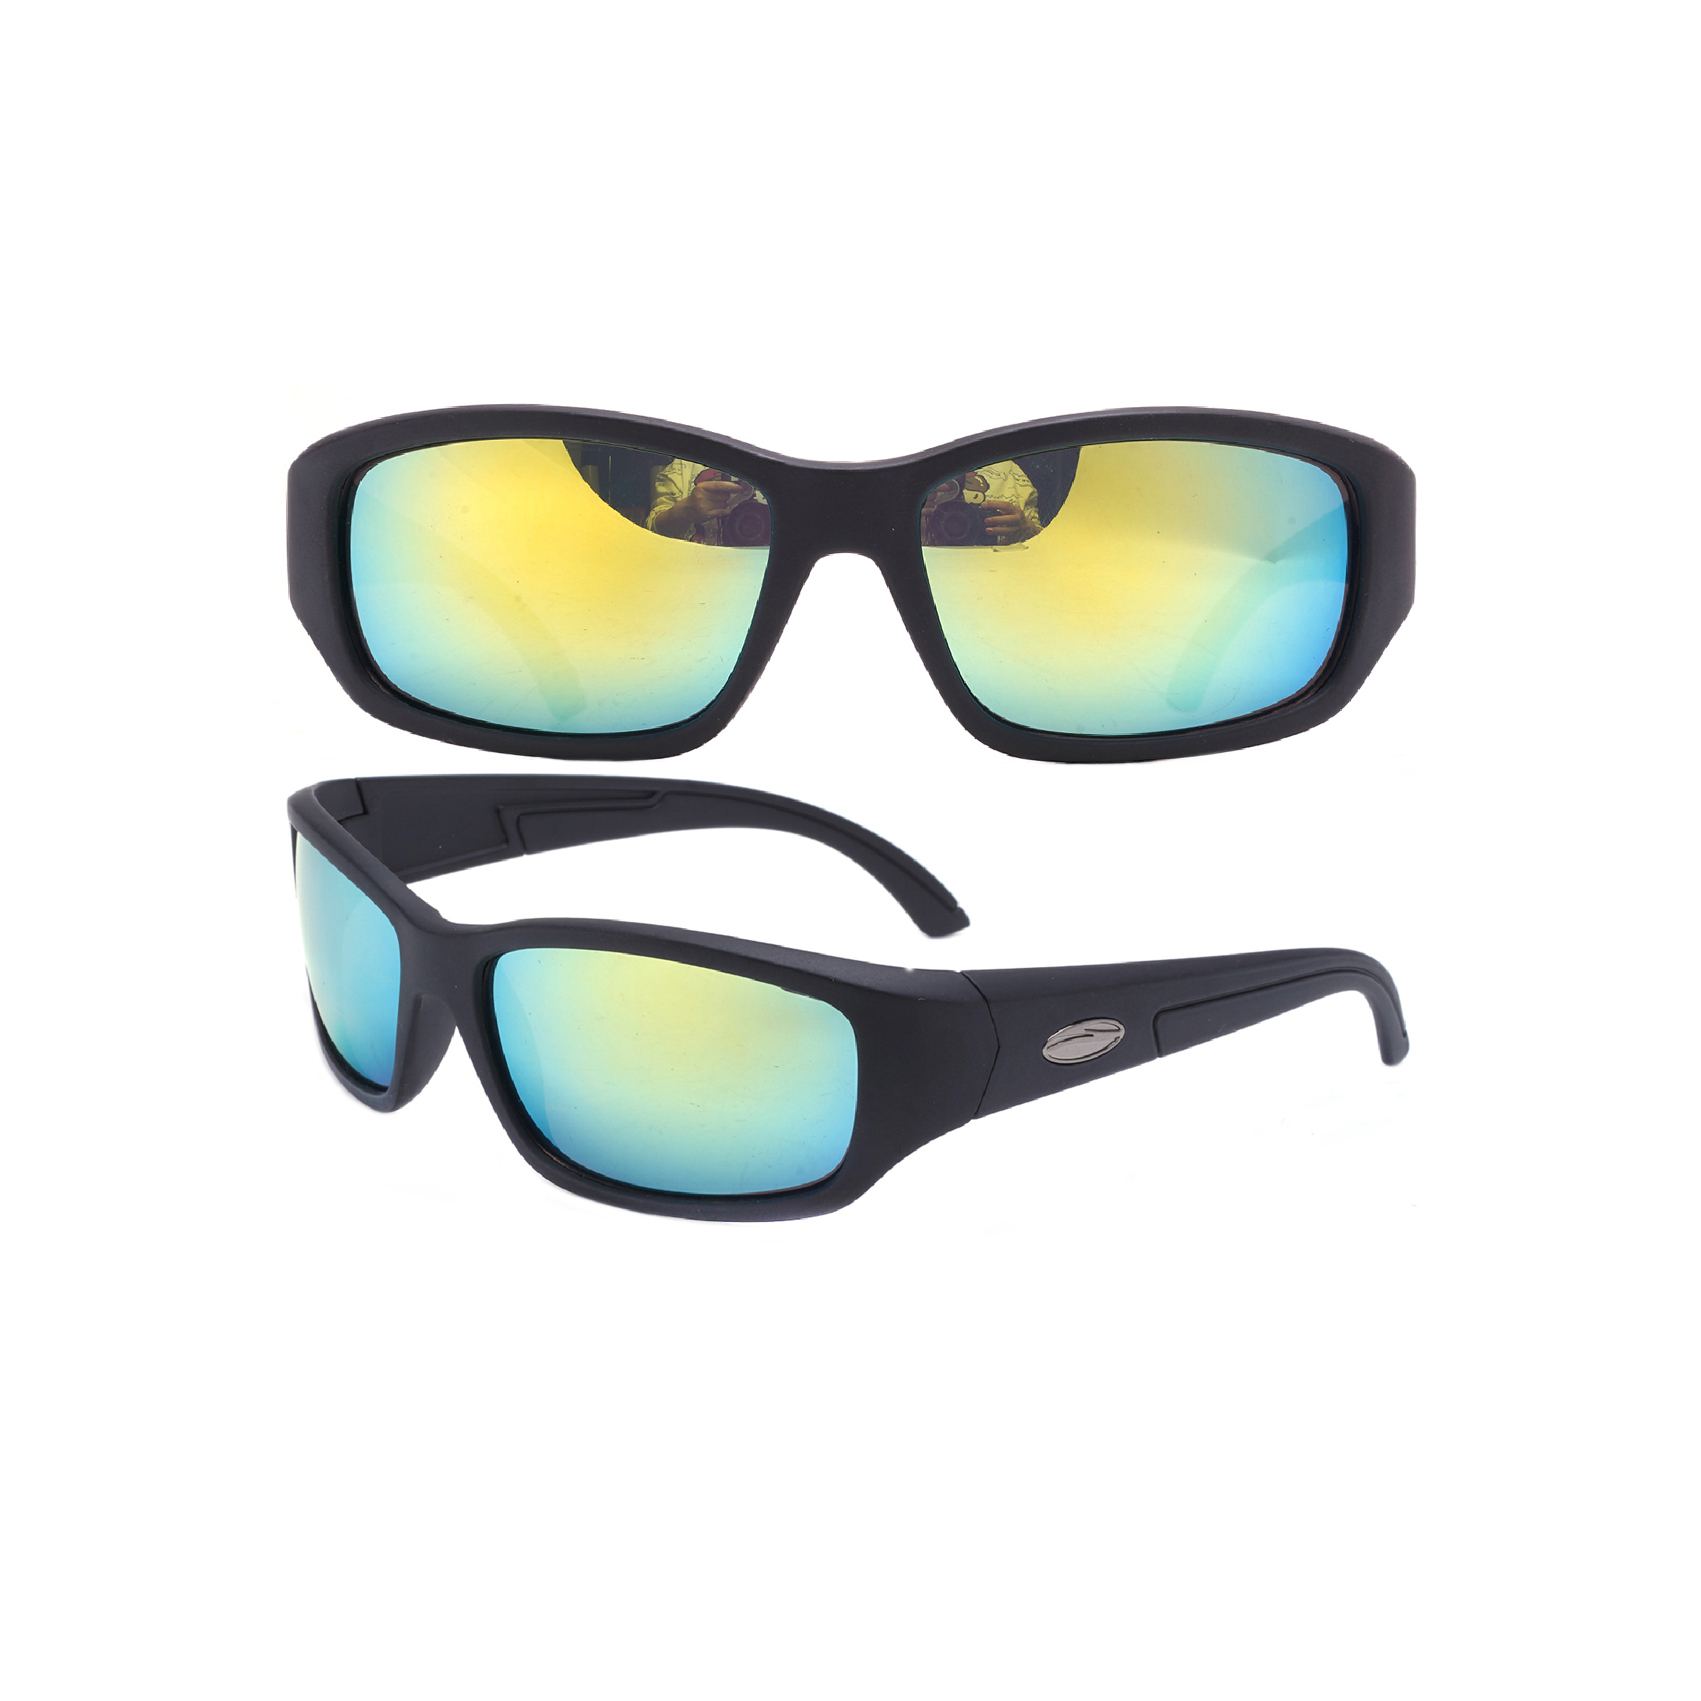 Black Sport Sunglasses with Yellow and Blue Polarizd Lenses Sports Sunglasses Manufacturers